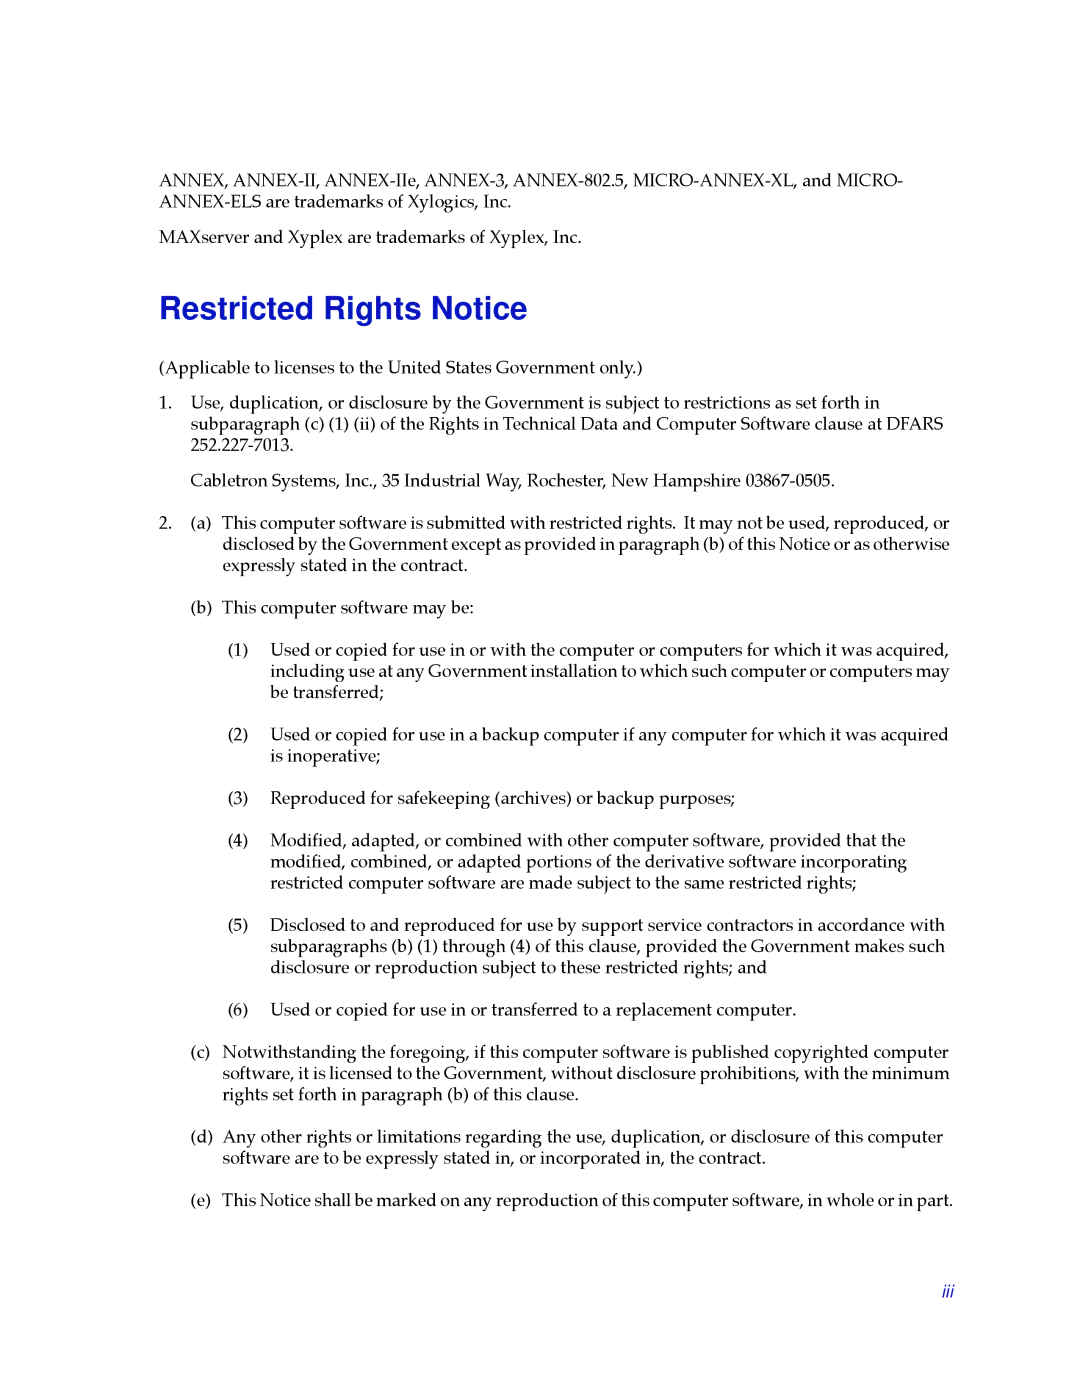 Cabletron Systems NB30 manual Restricted Rights Notice 